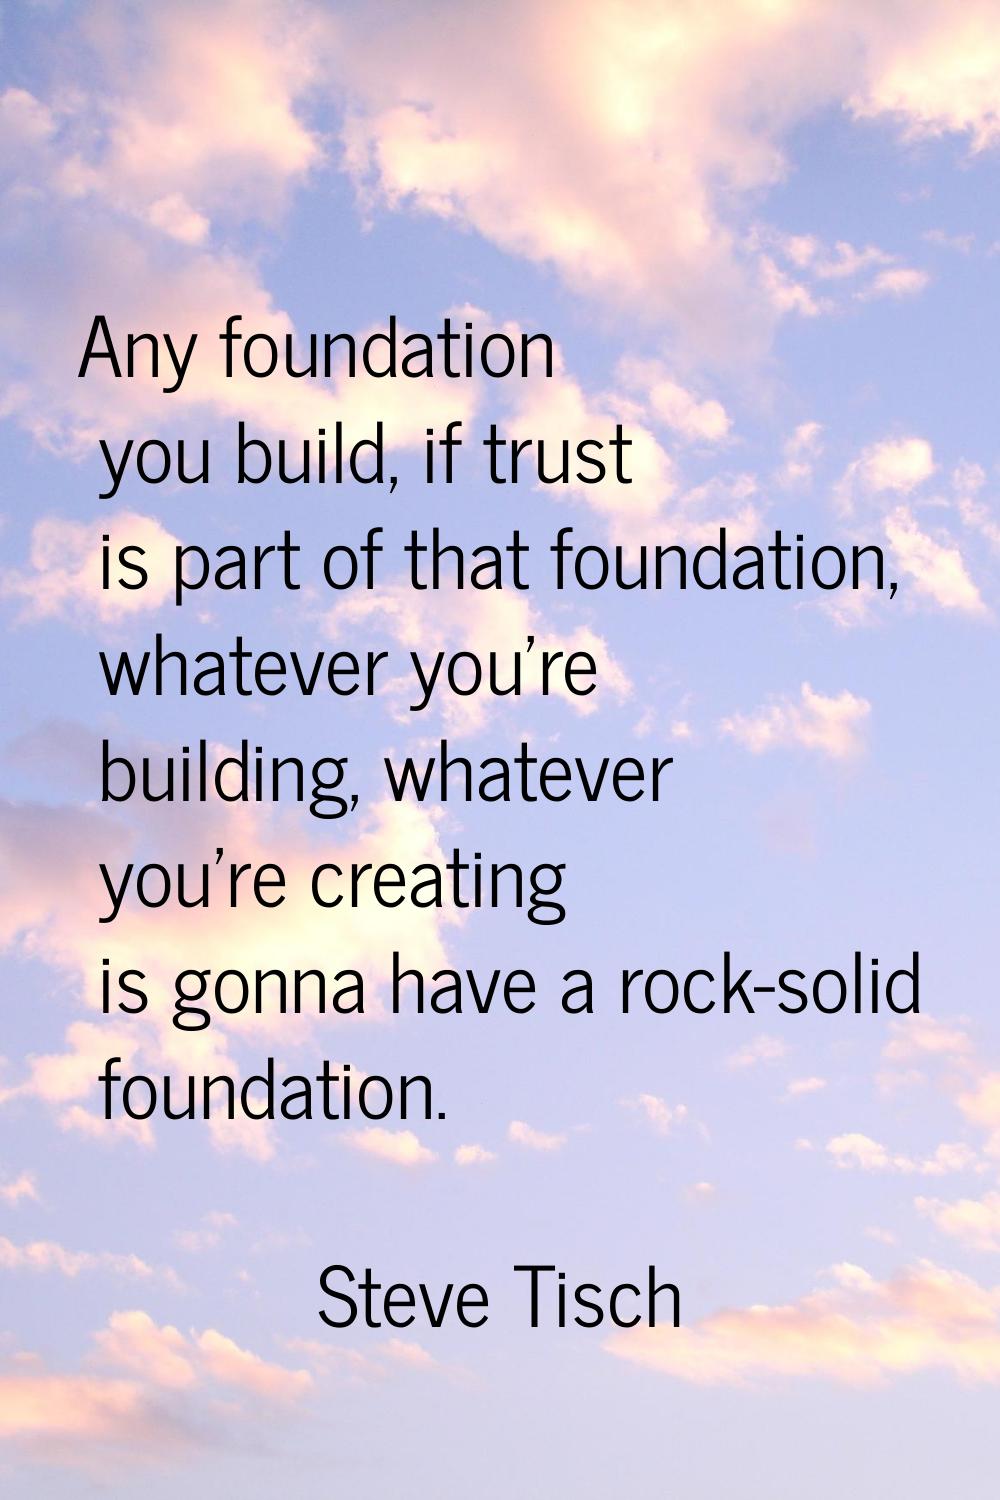 Any foundation you build, if trust is part of that foundation, whatever you're building, whatever y